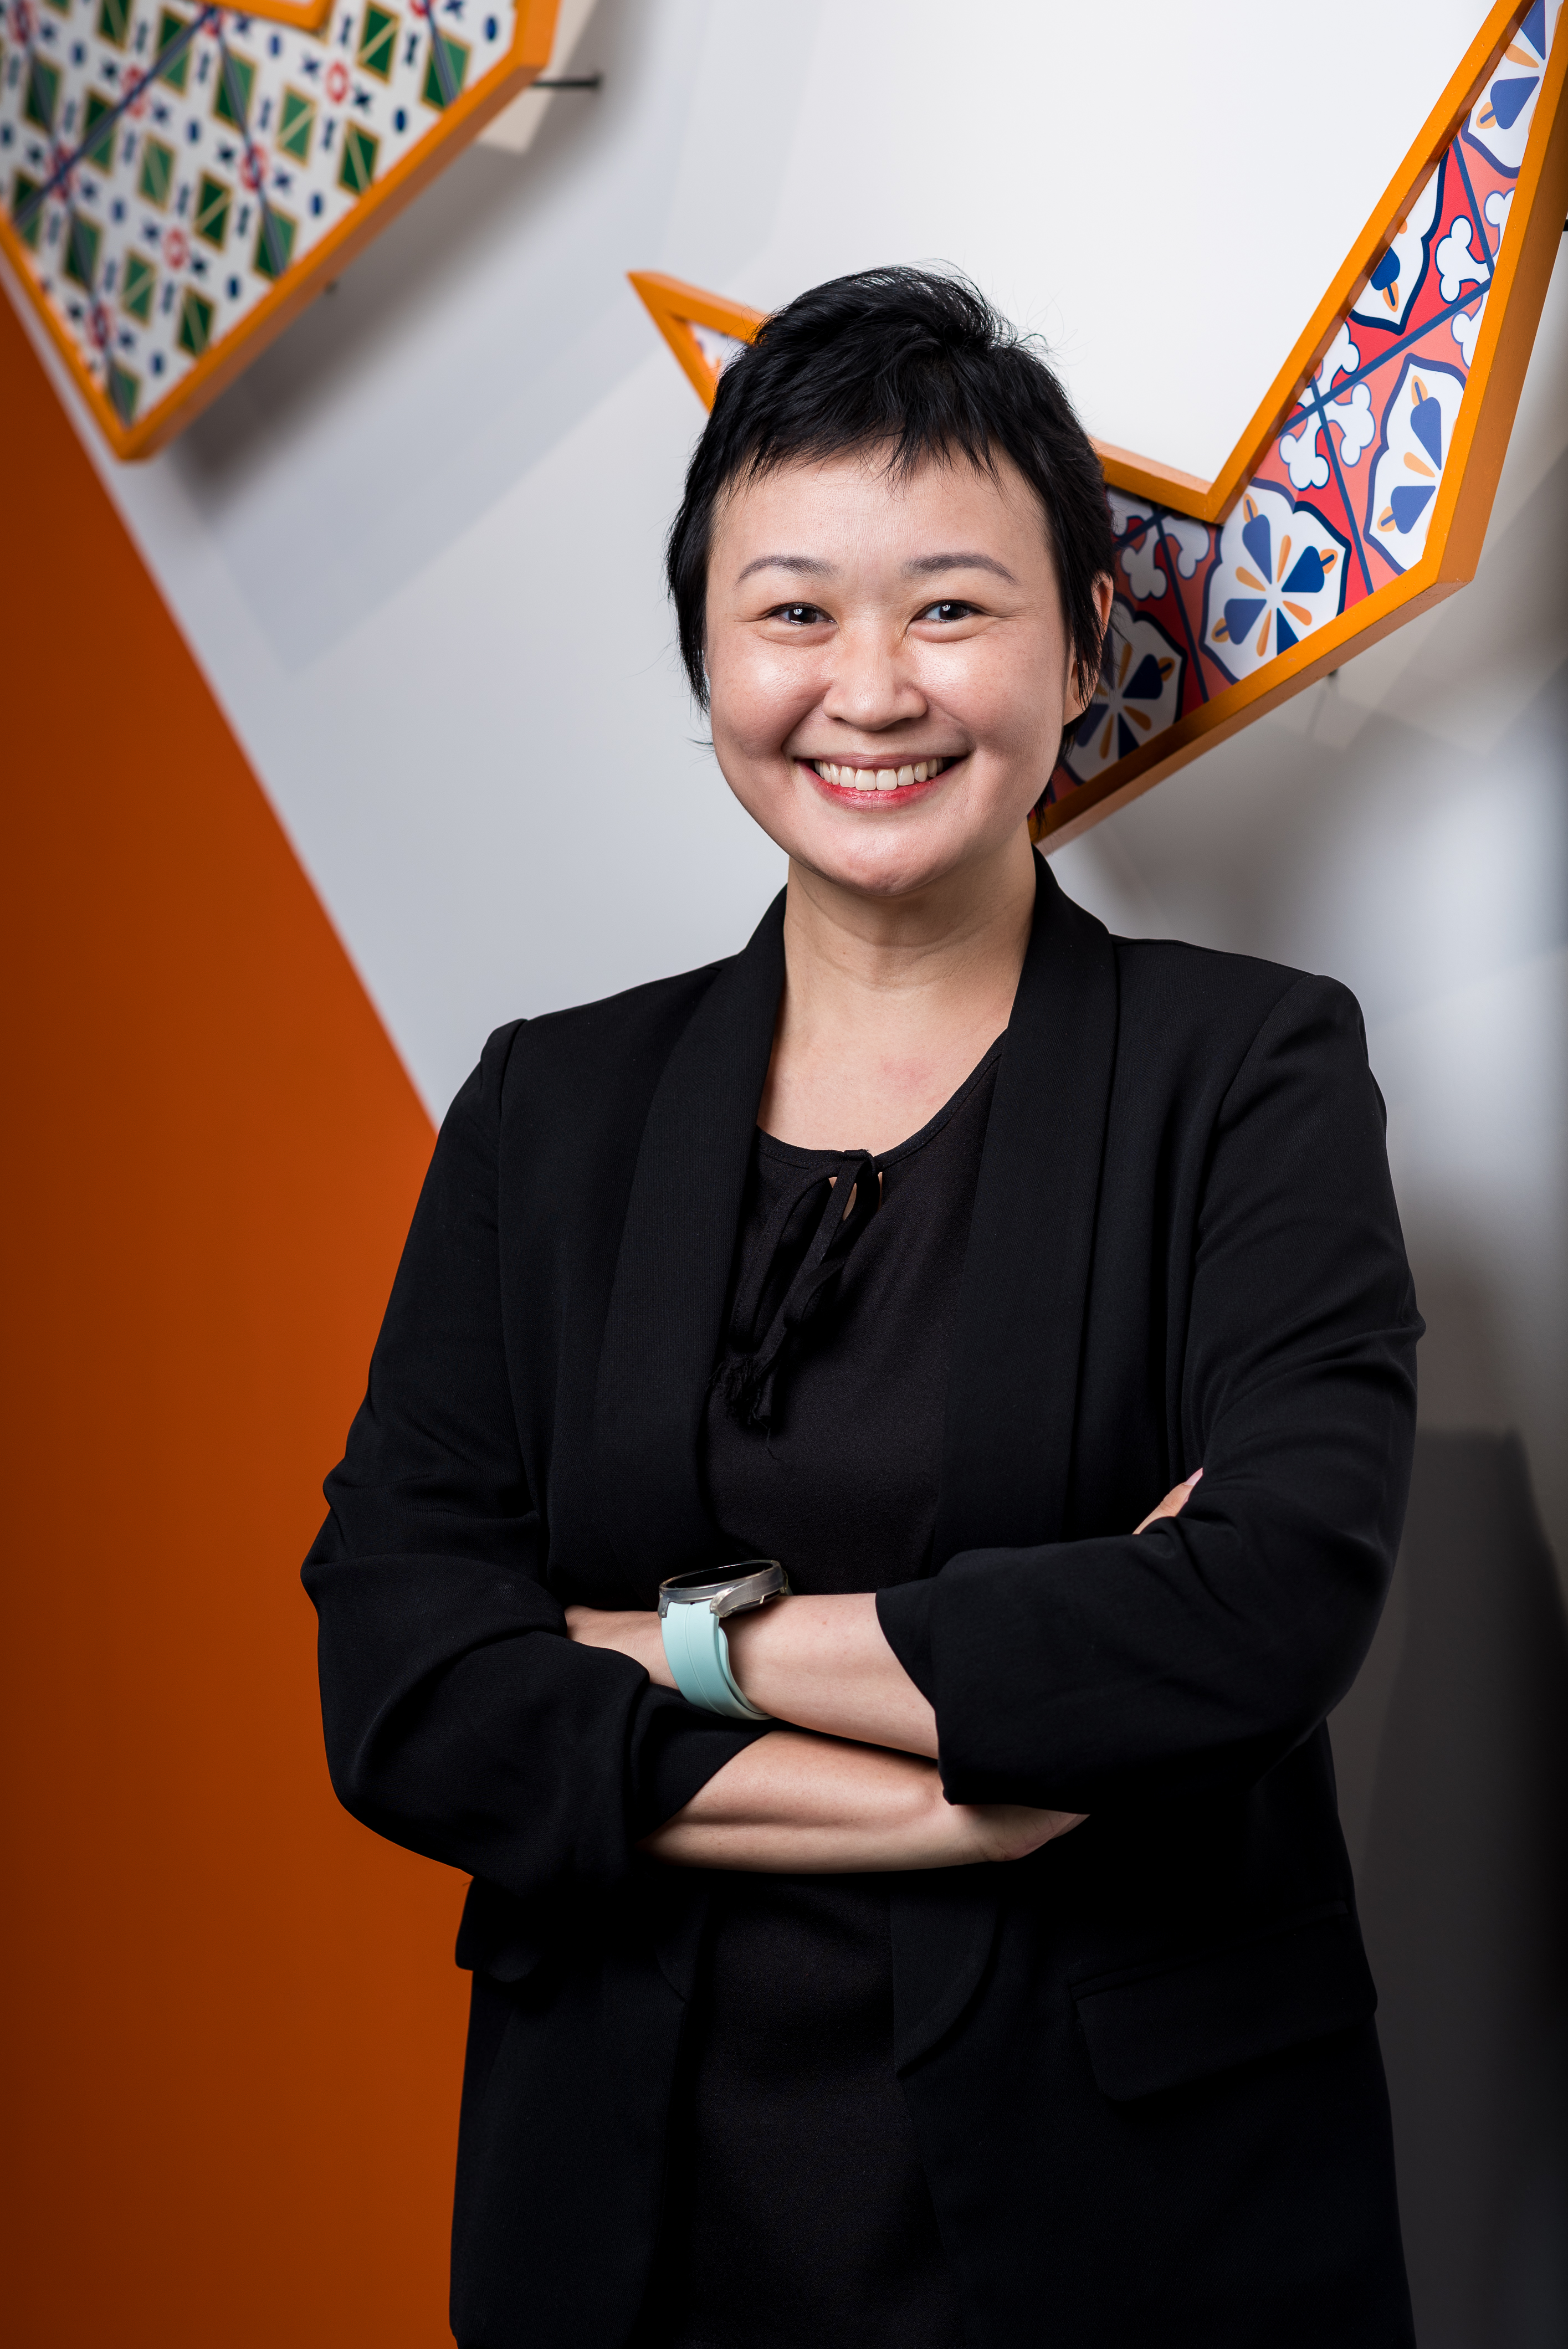 Esther New - Head of Project Management, Asia Pacific